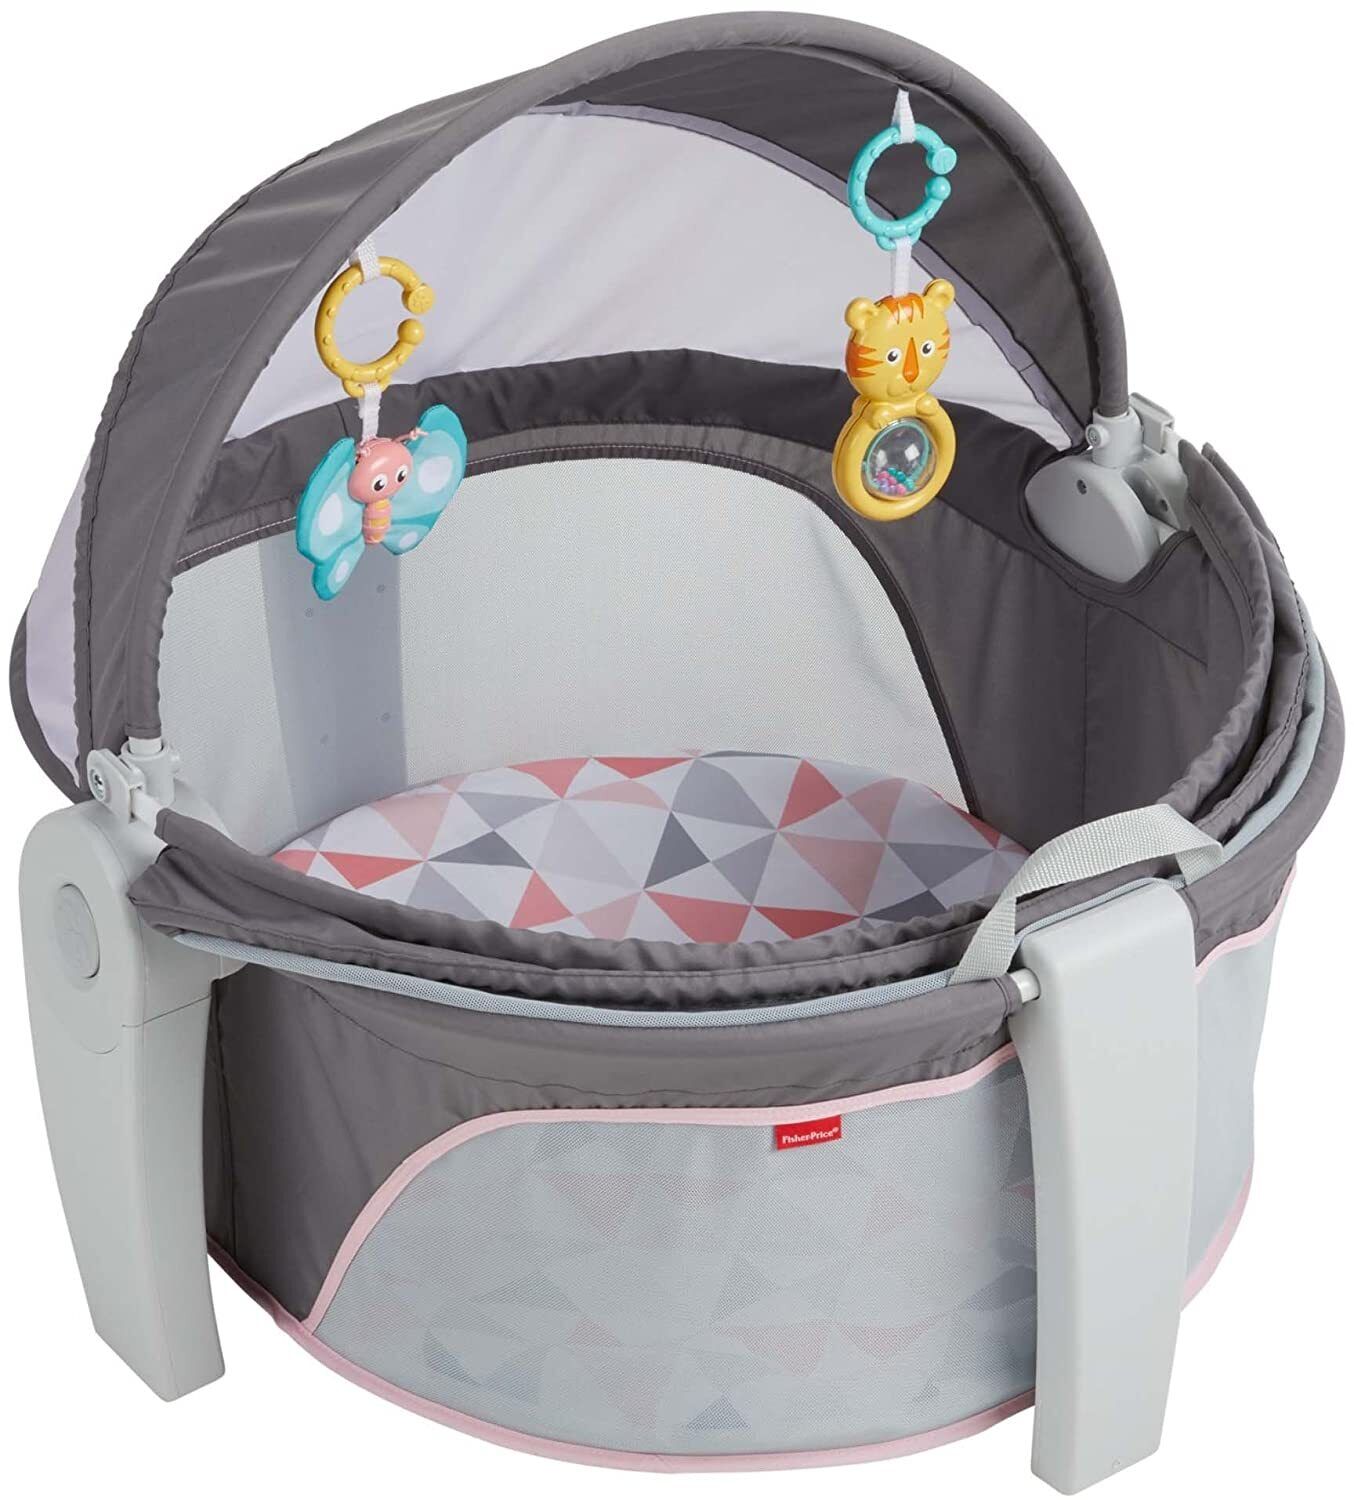 Fisher-price On-the-go Baby Dome, Rosy Windmill, Grey/pink